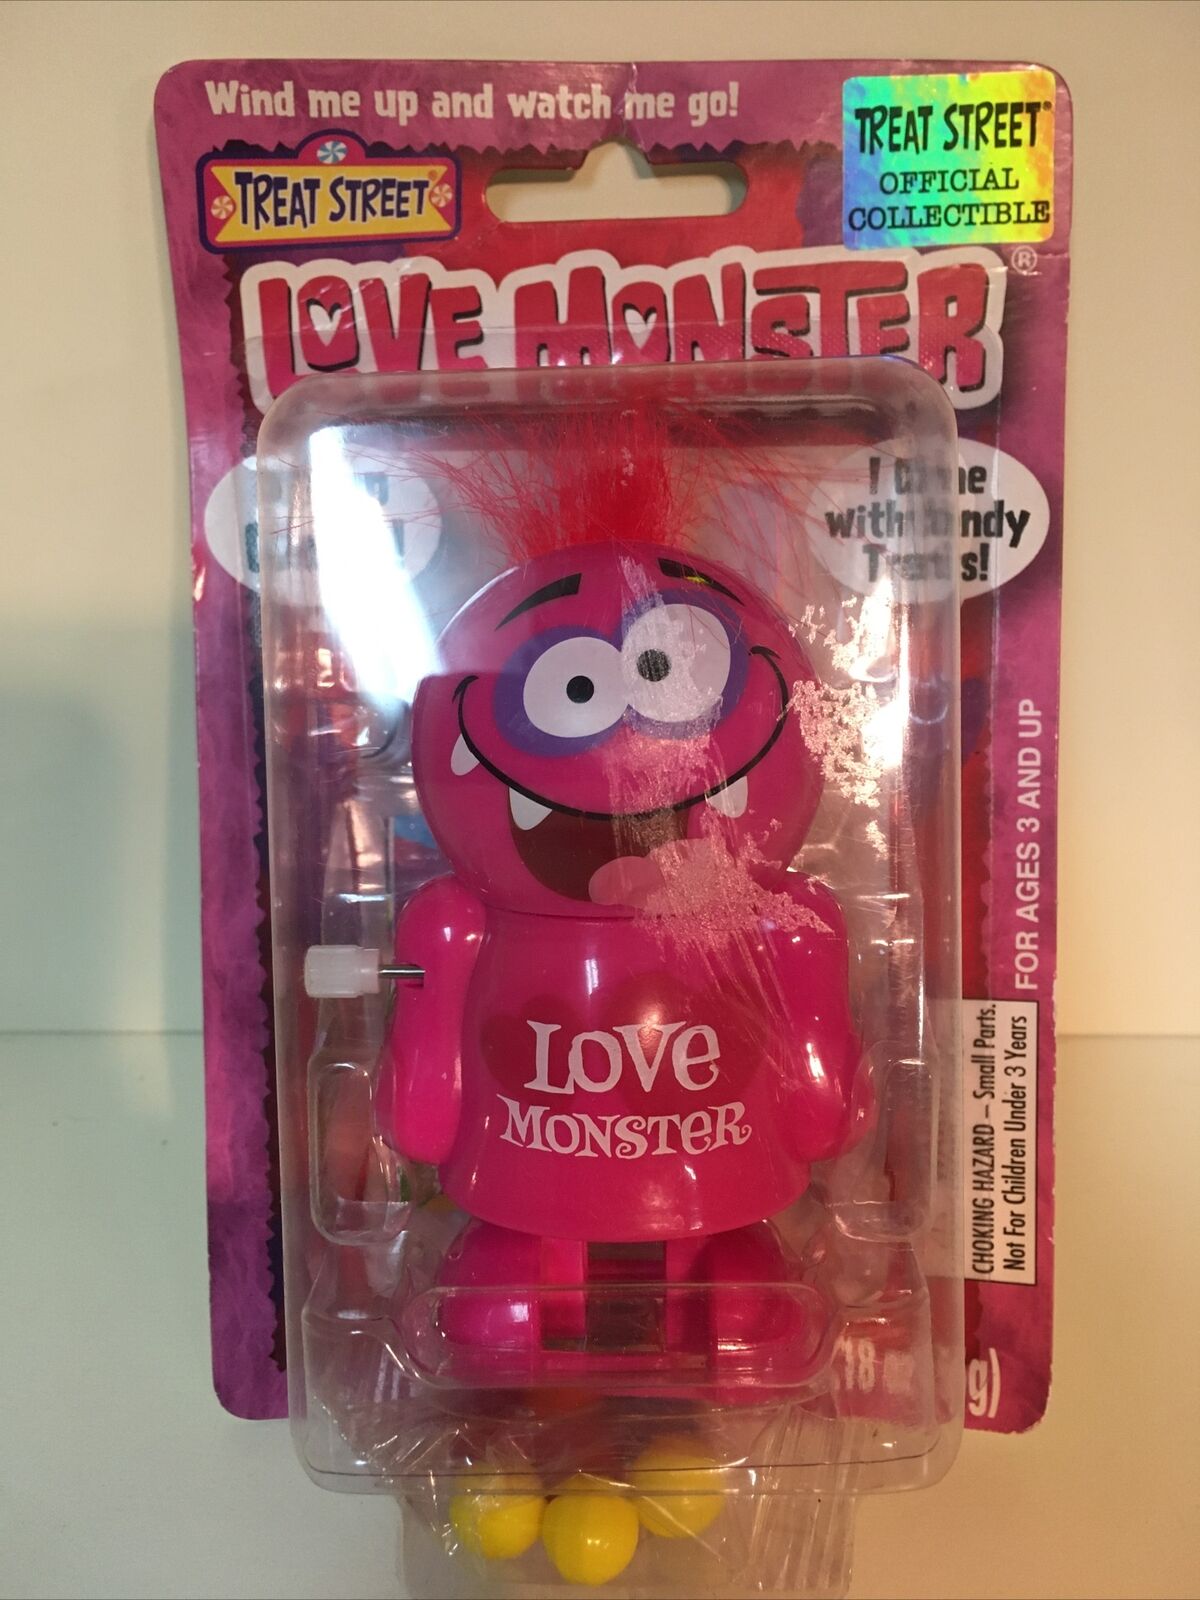 Treat Street Love Monster Wind Up Candy Dispenser "collectible"